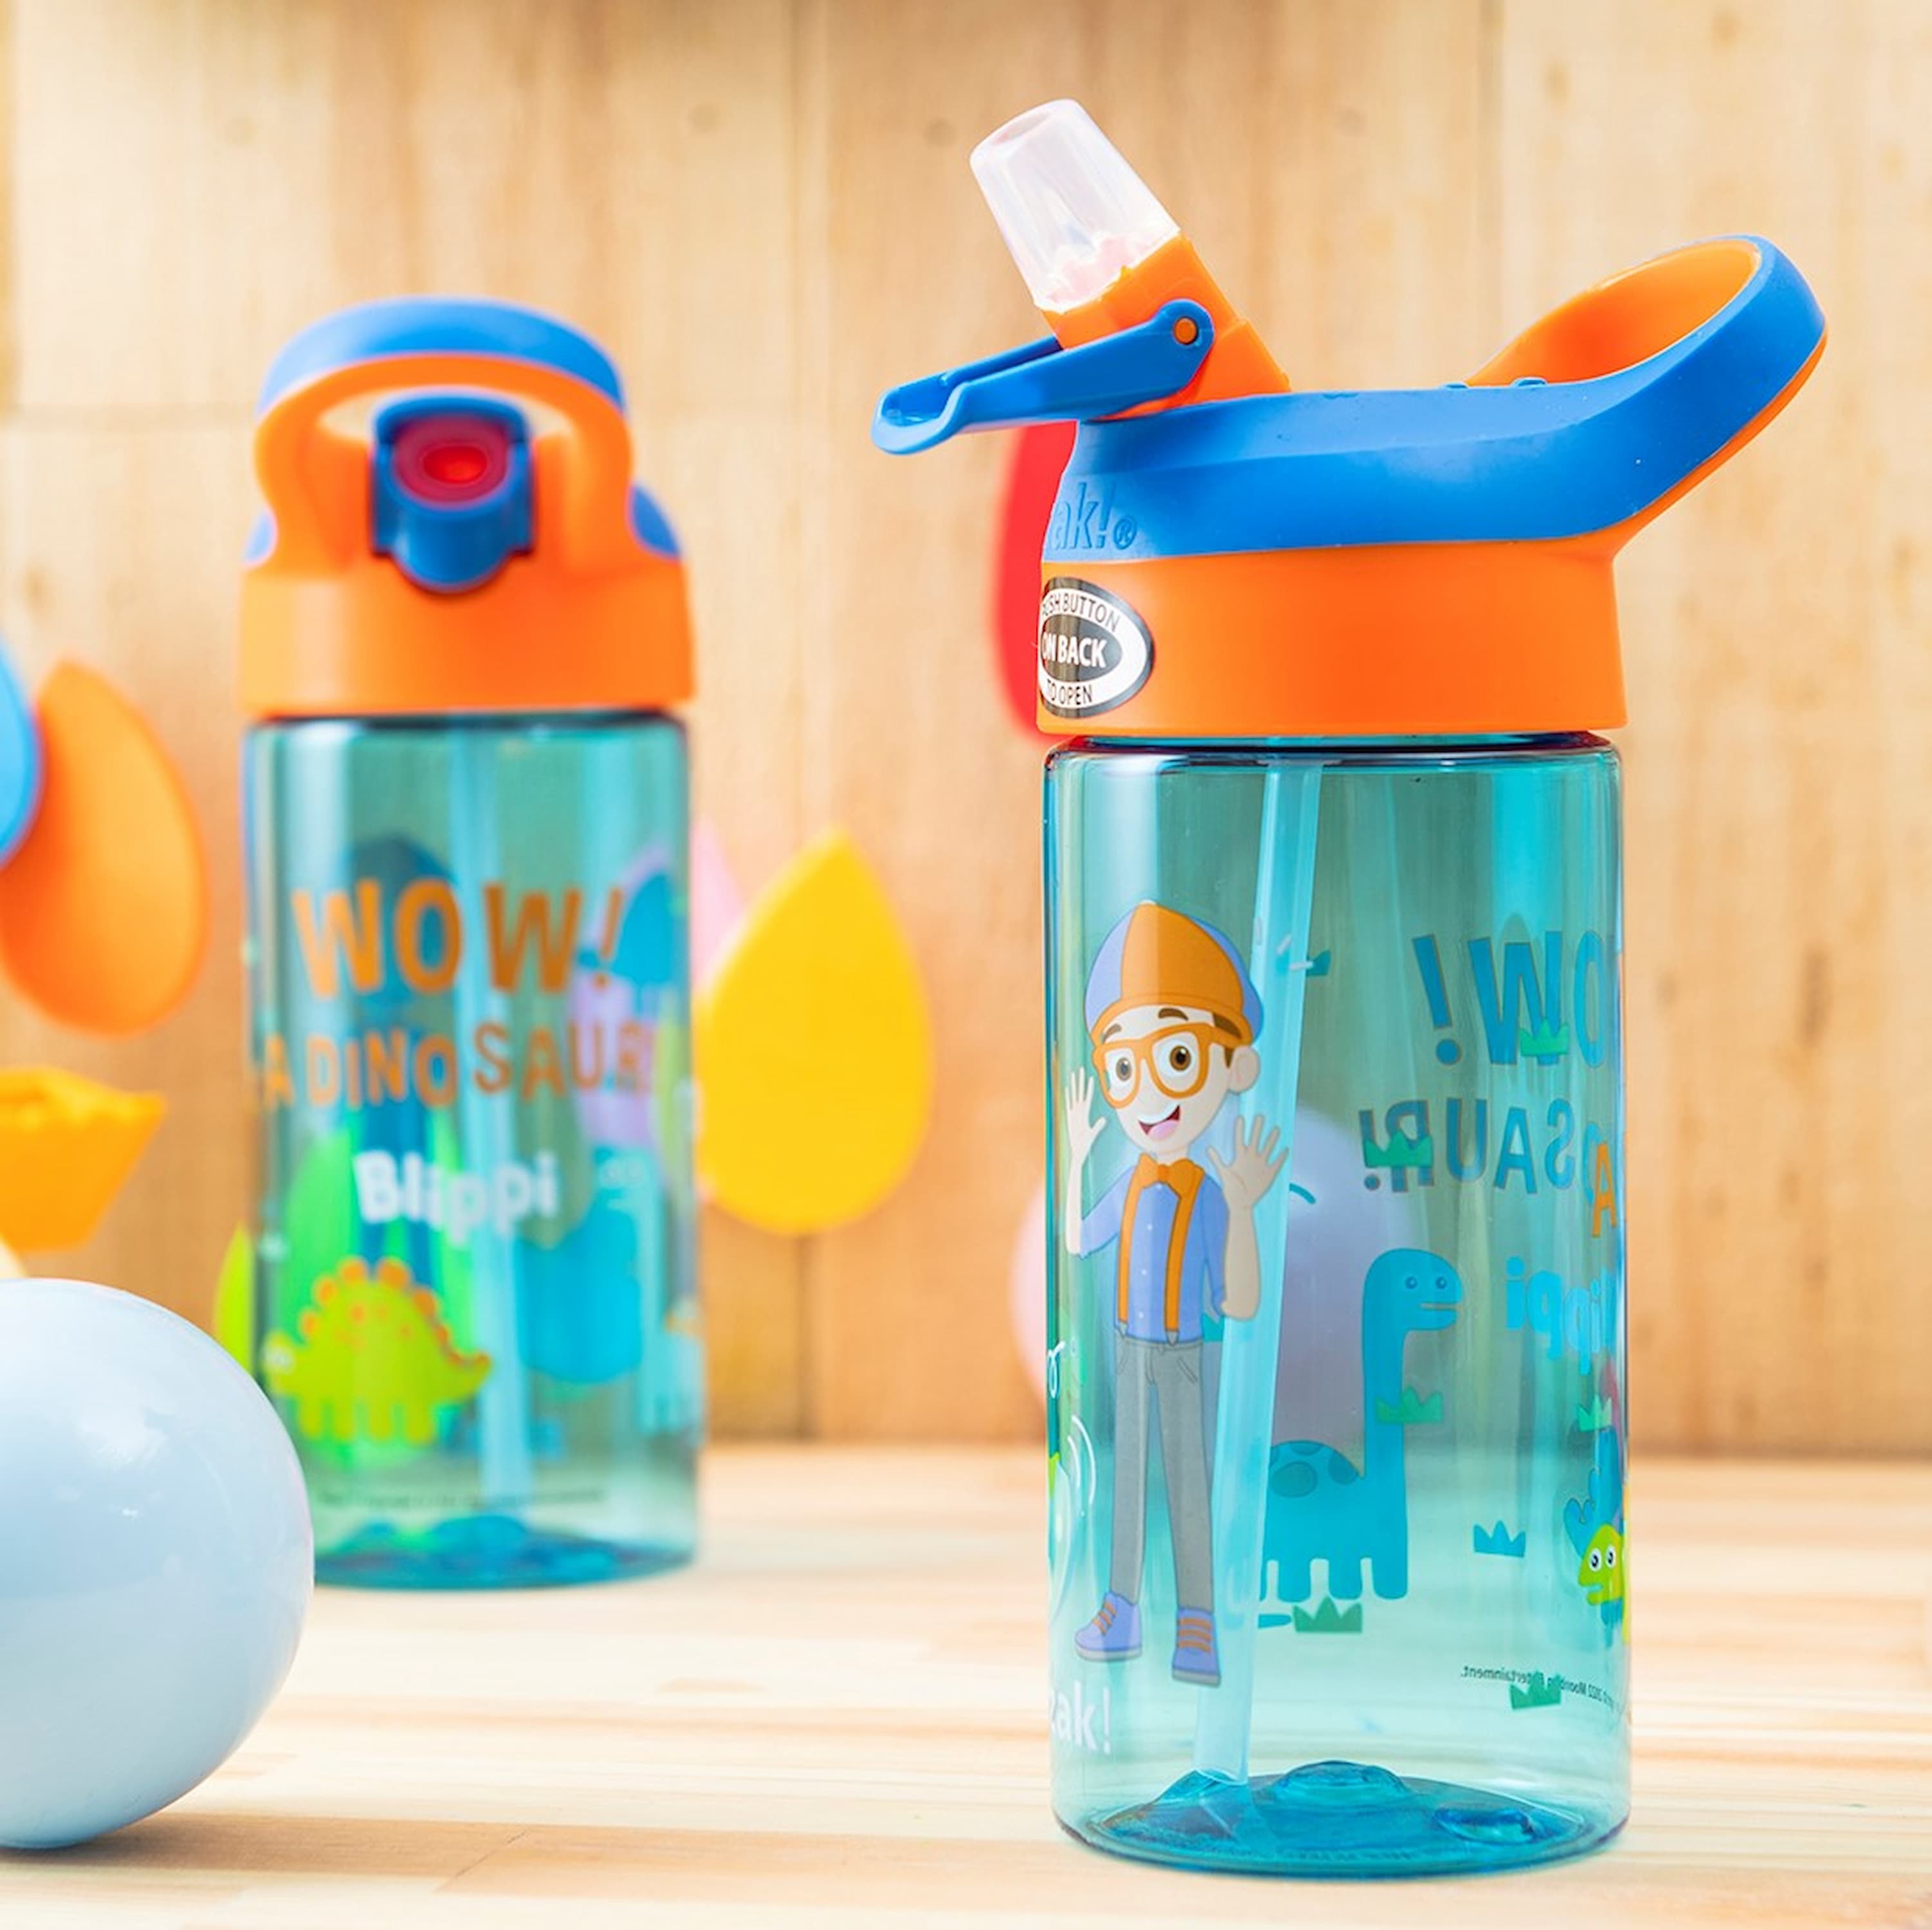 Zak Designs Blippi Kids Water Bottle with Spout Cover and Built-in Carrying Loop, Made of Durable Plastic, Leak-Proof Water Bottle Design for Travel